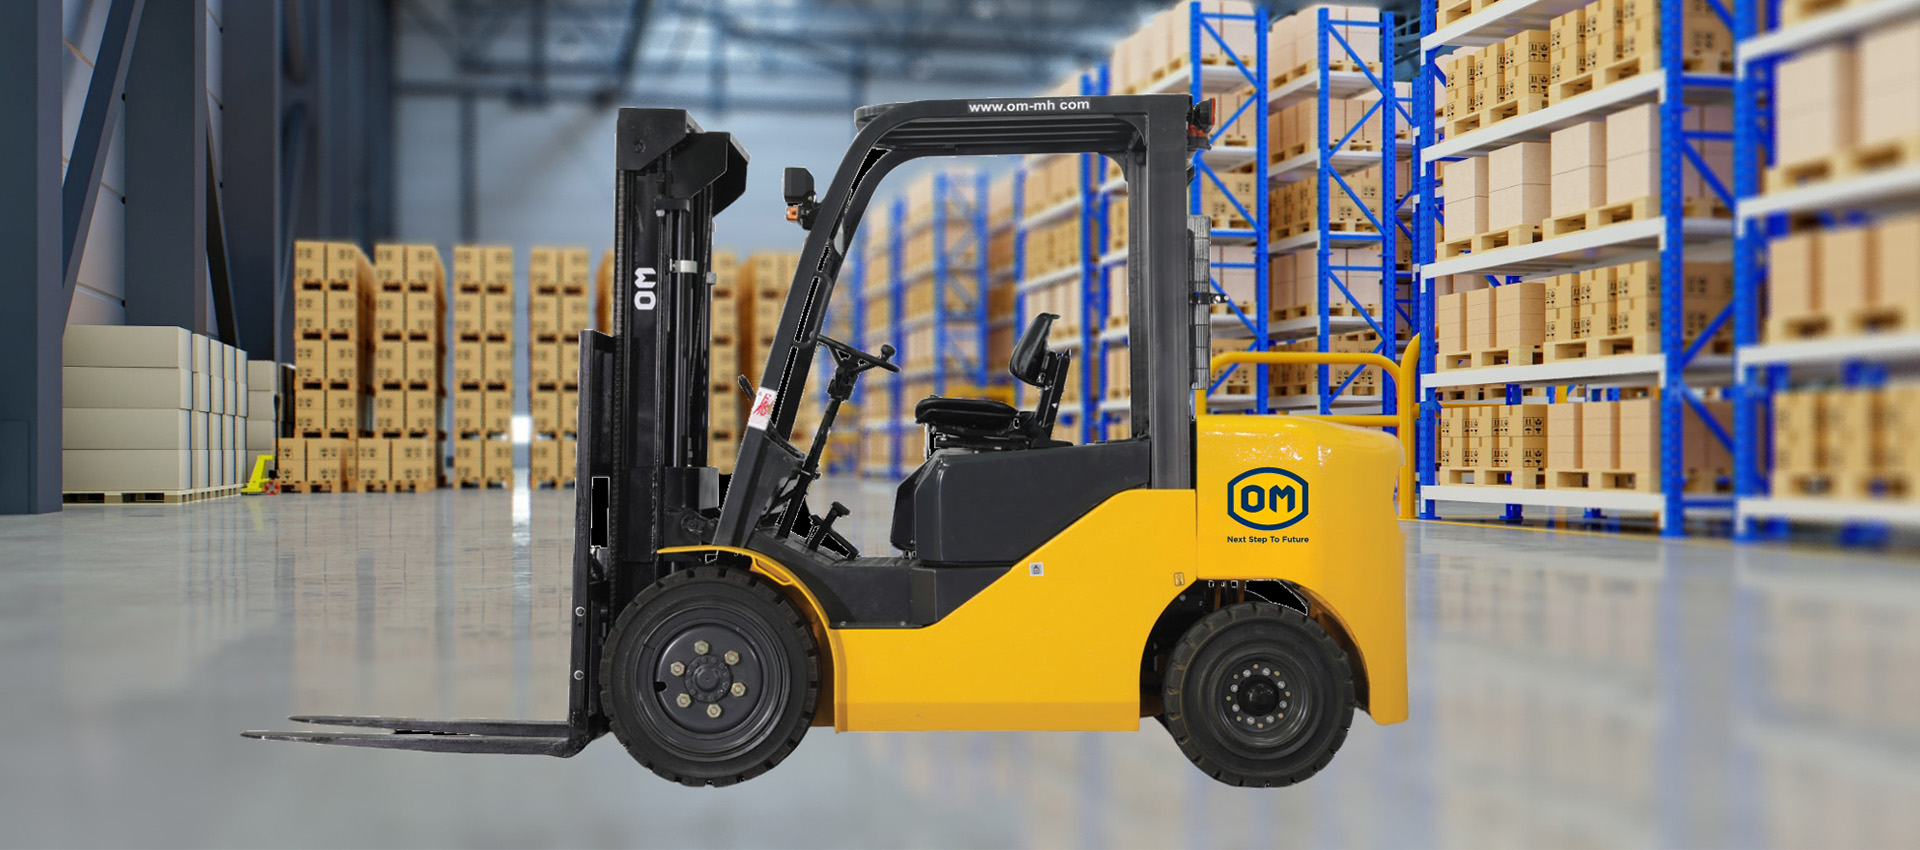 Questions you must ask when buying a Forklift?